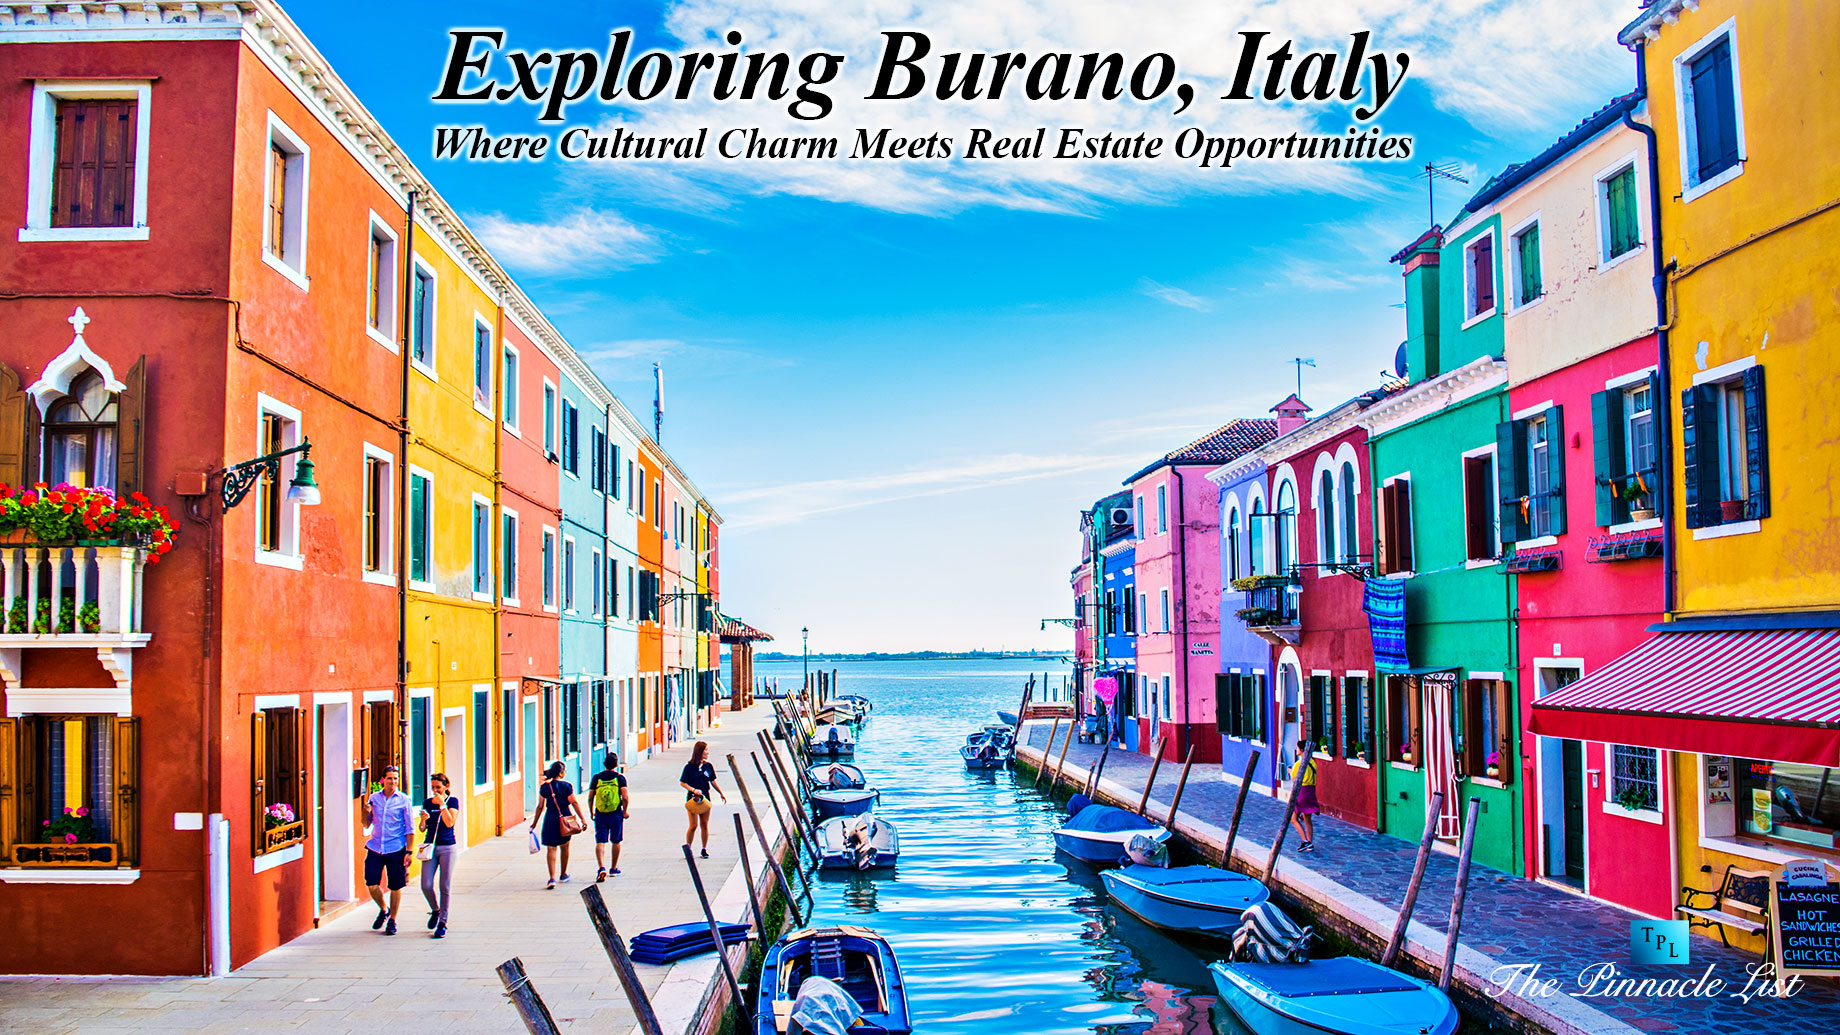 Exploring Burano, Italy: Where Cultural Charm Meets Real Estate Opportunities